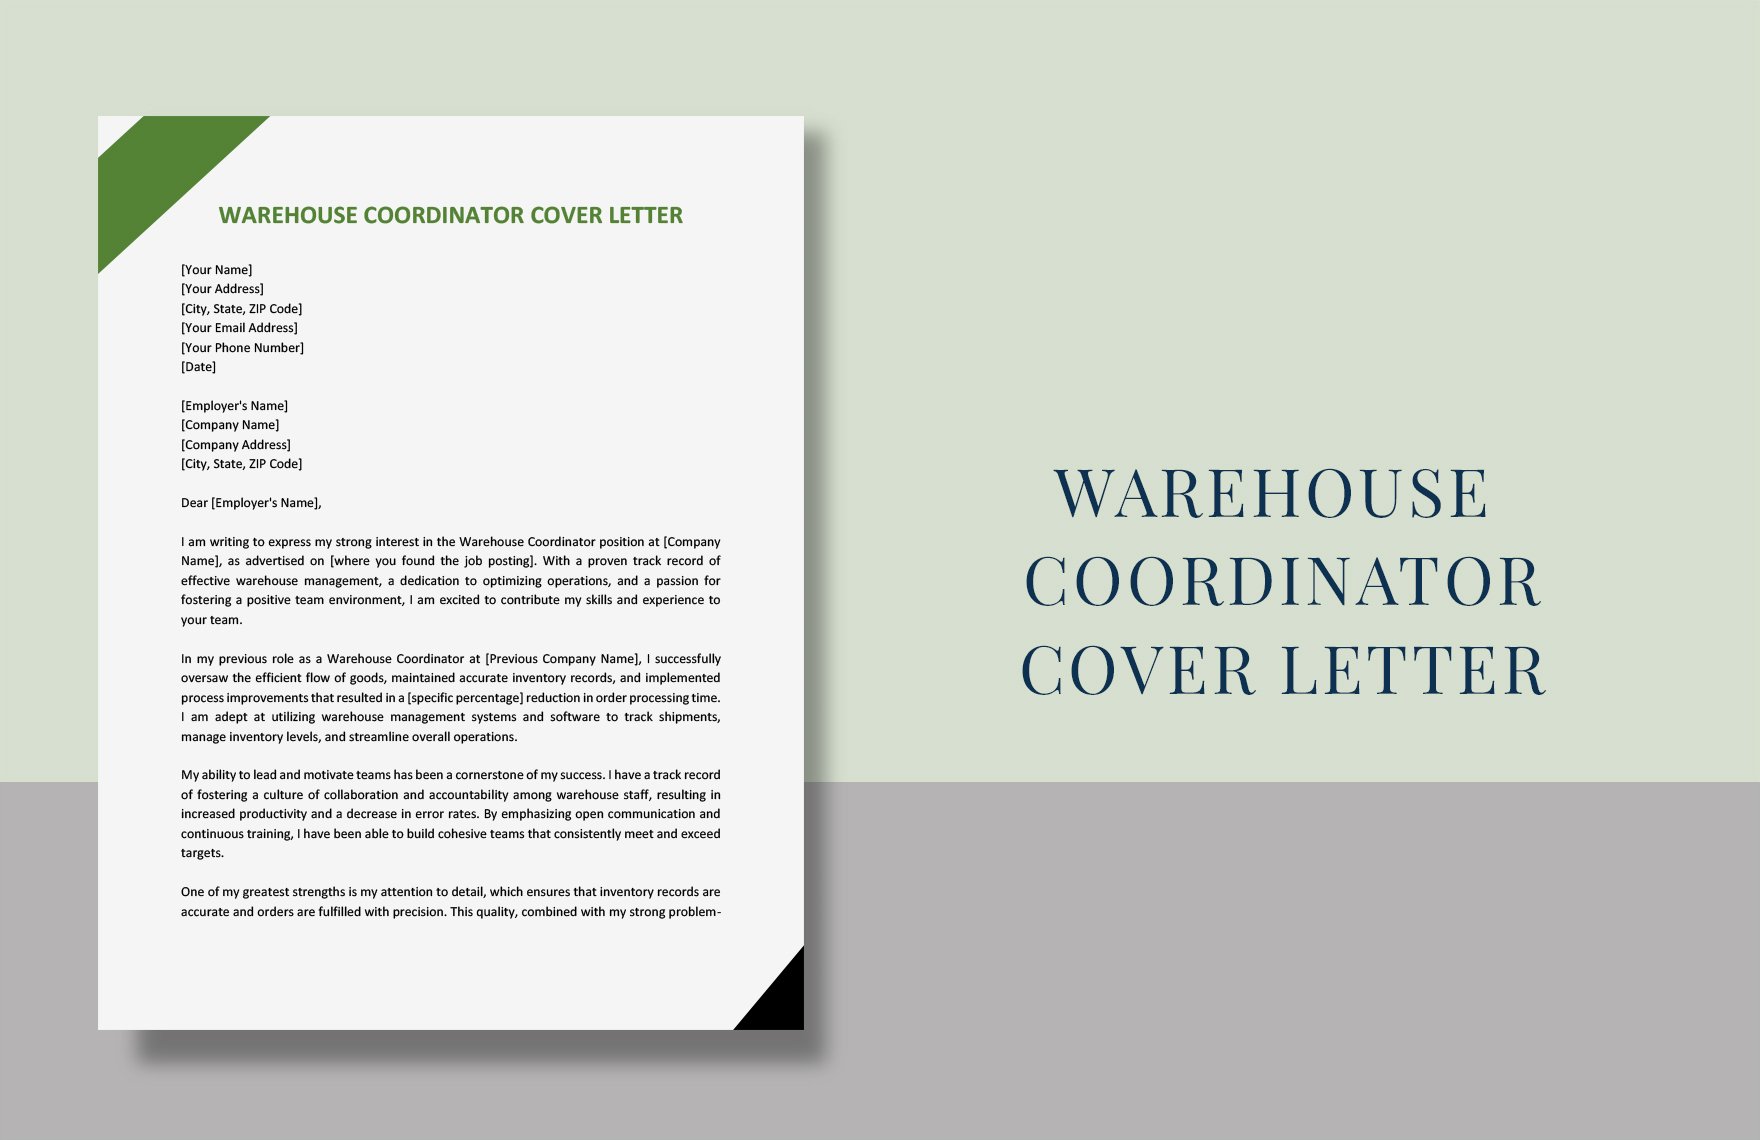 Warehouse Coordinator Cover Letter in Word, Google Docs, PDF